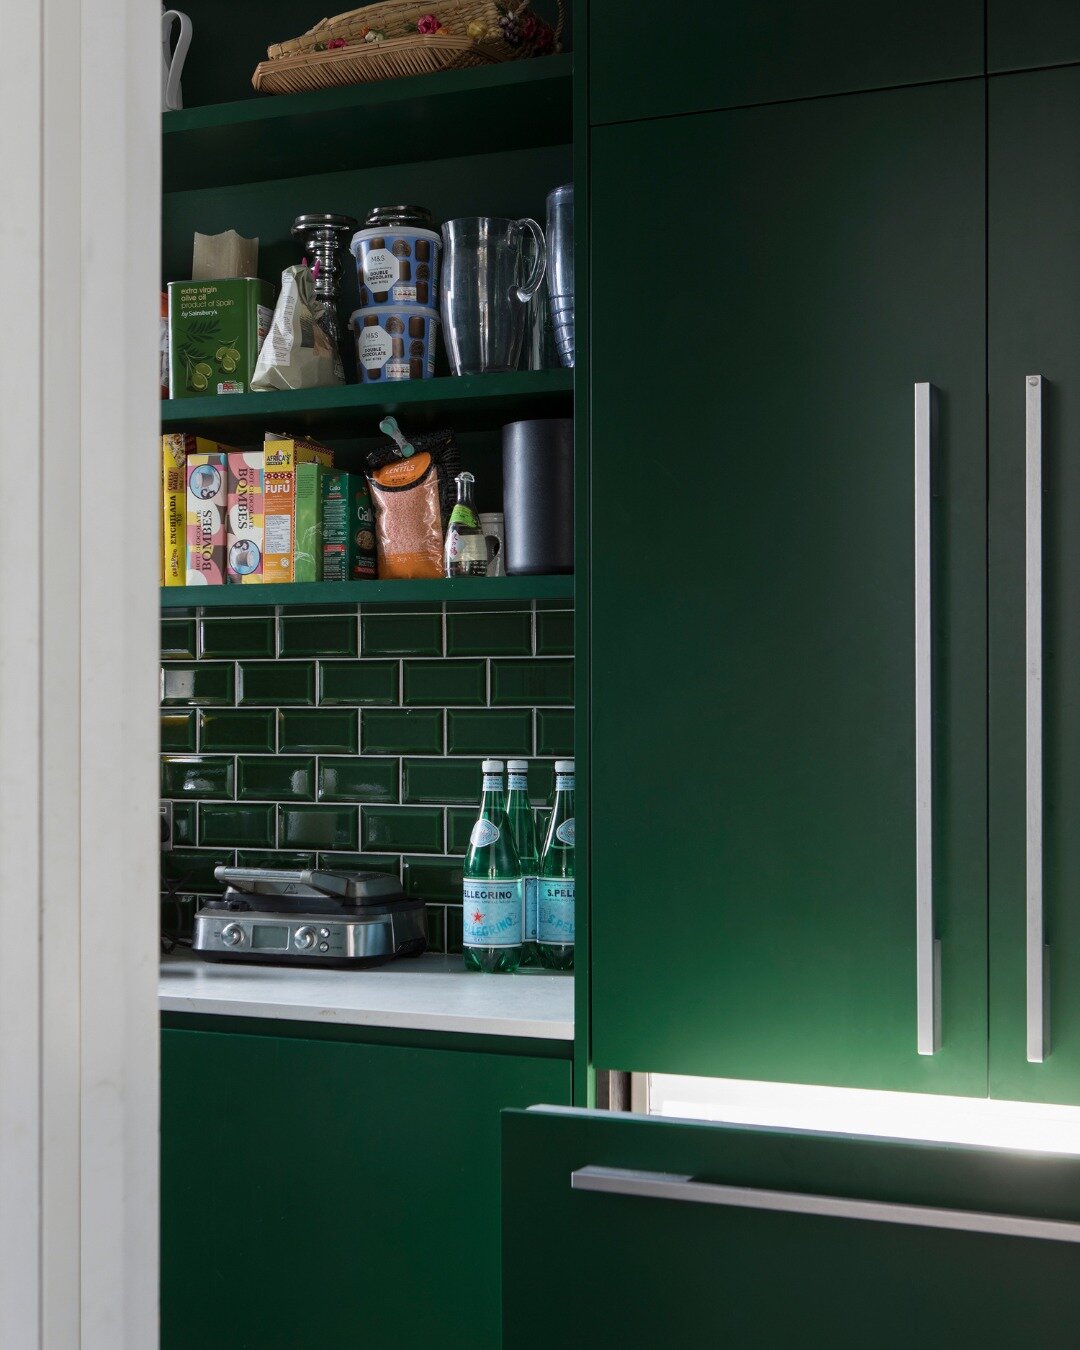 K I T C H E N  P A N T R Y 

A welcoming luxury addition to any kitchen is the Kitchen Pantry 🤍

The first image depicts cleverly integrated units with a backless tall cupboard which houses the fridge freezer. Top doors above feature soft close 'pus